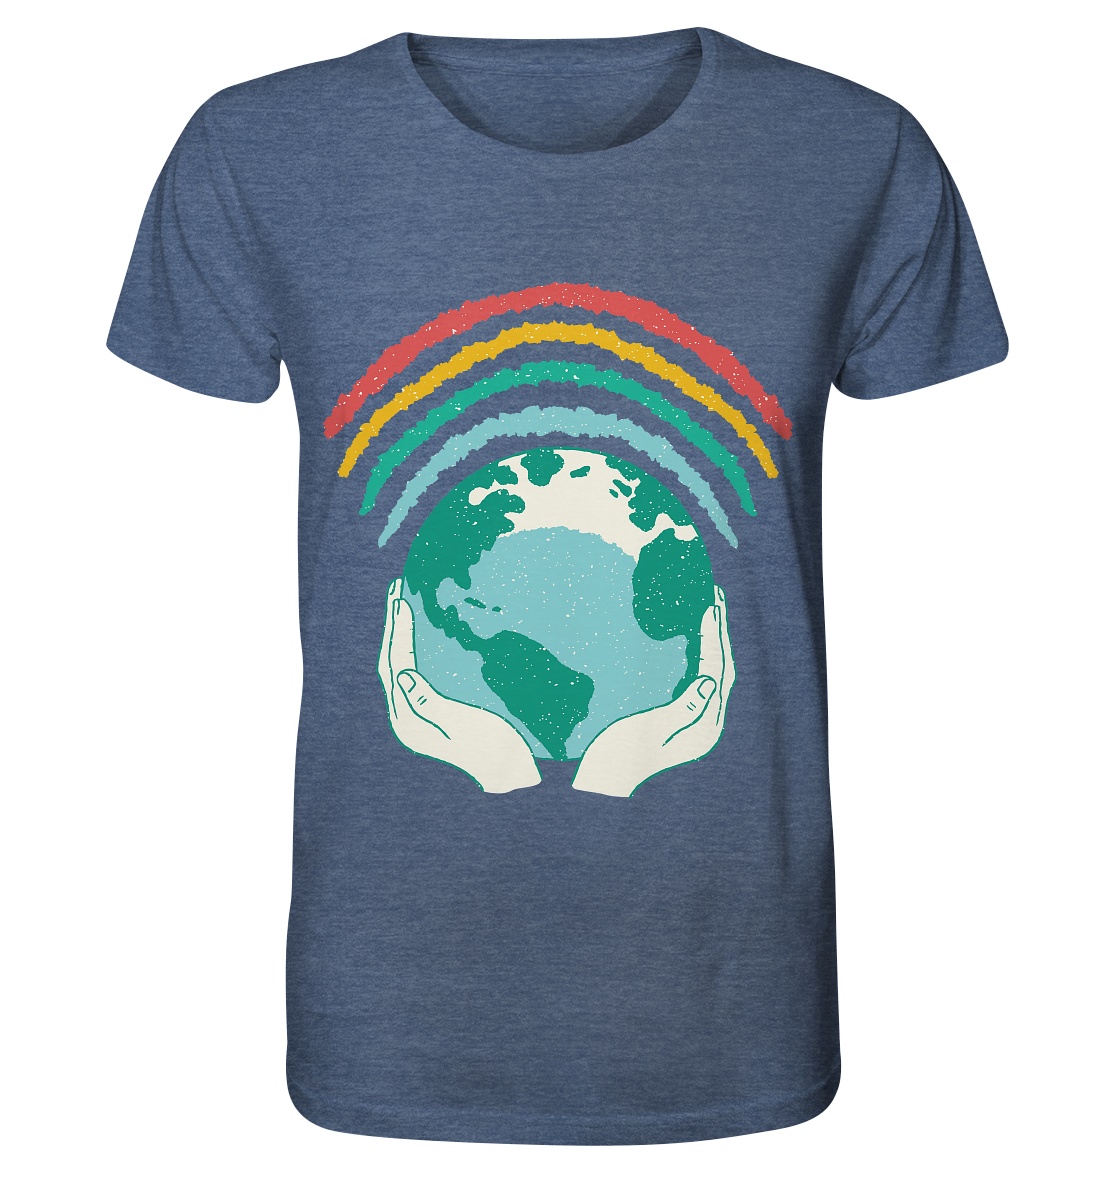 Rainbow with globe in hands - Organic Shirt (mottled)